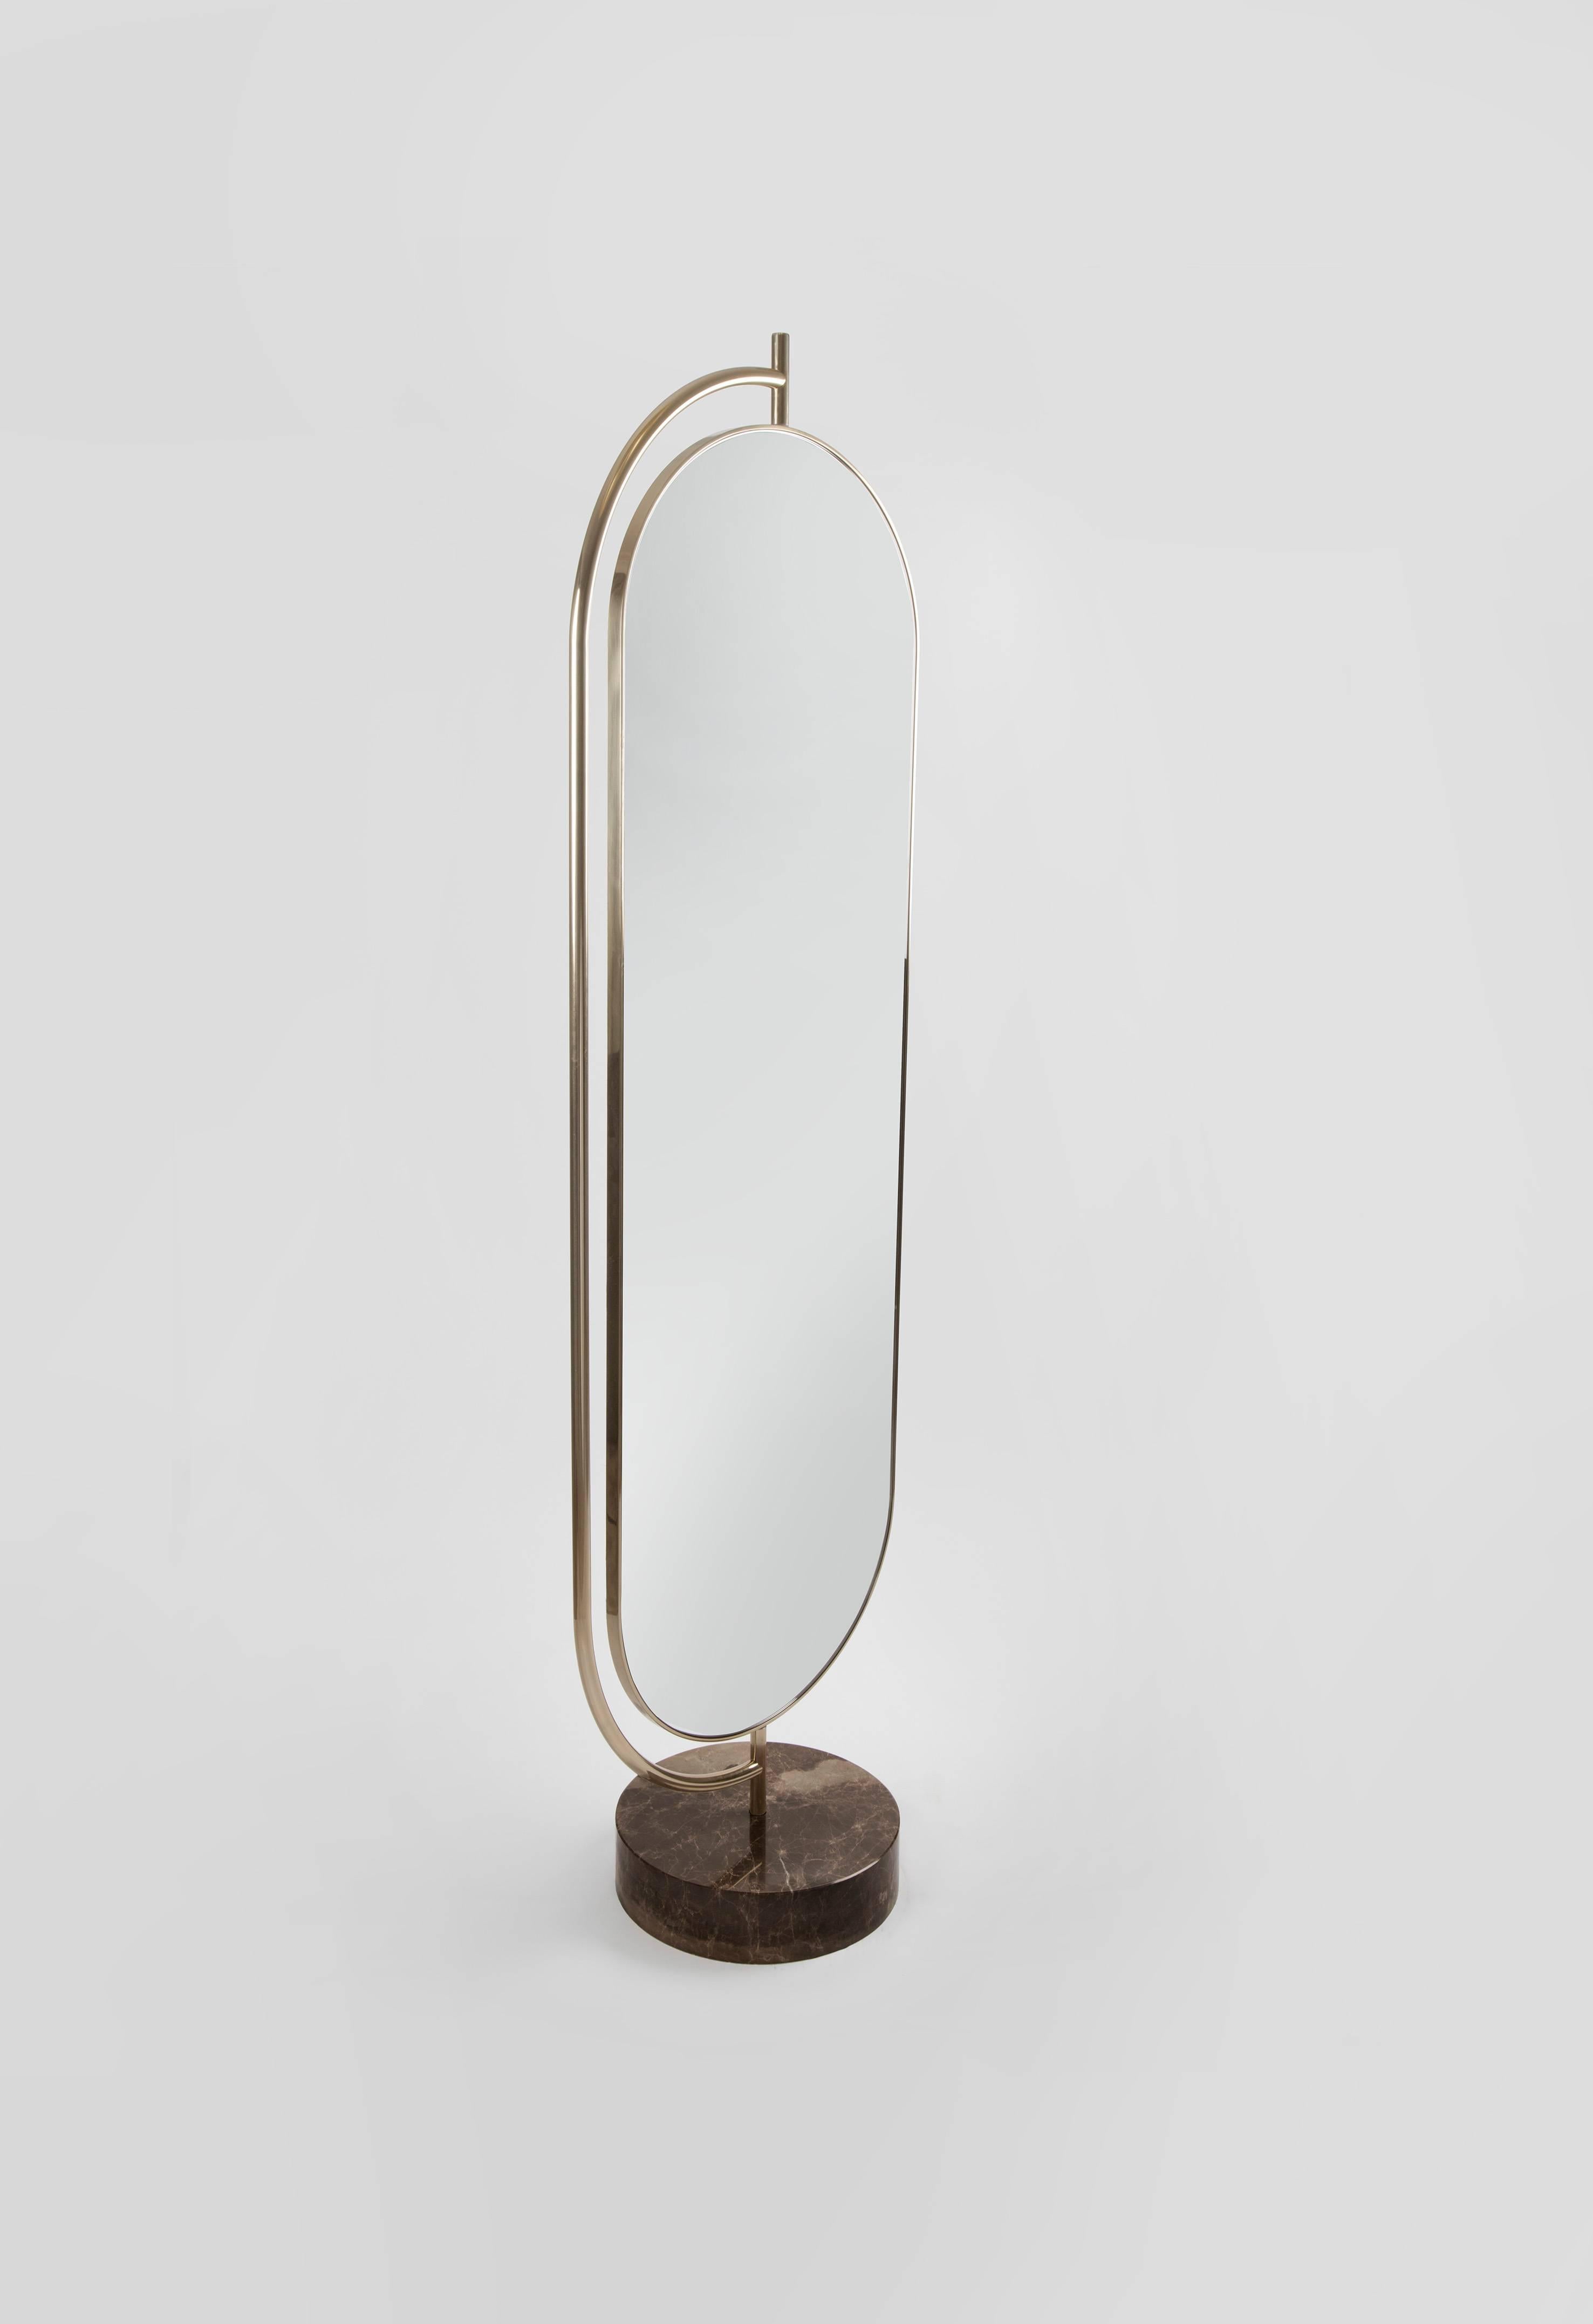 Giove is a full length mirror supported by a polished marble base with a champagne brass structure. The back of the mirror is upholstered in velvet. Giove can rotate inside the brass structure, offering new shapes and angles every time it is